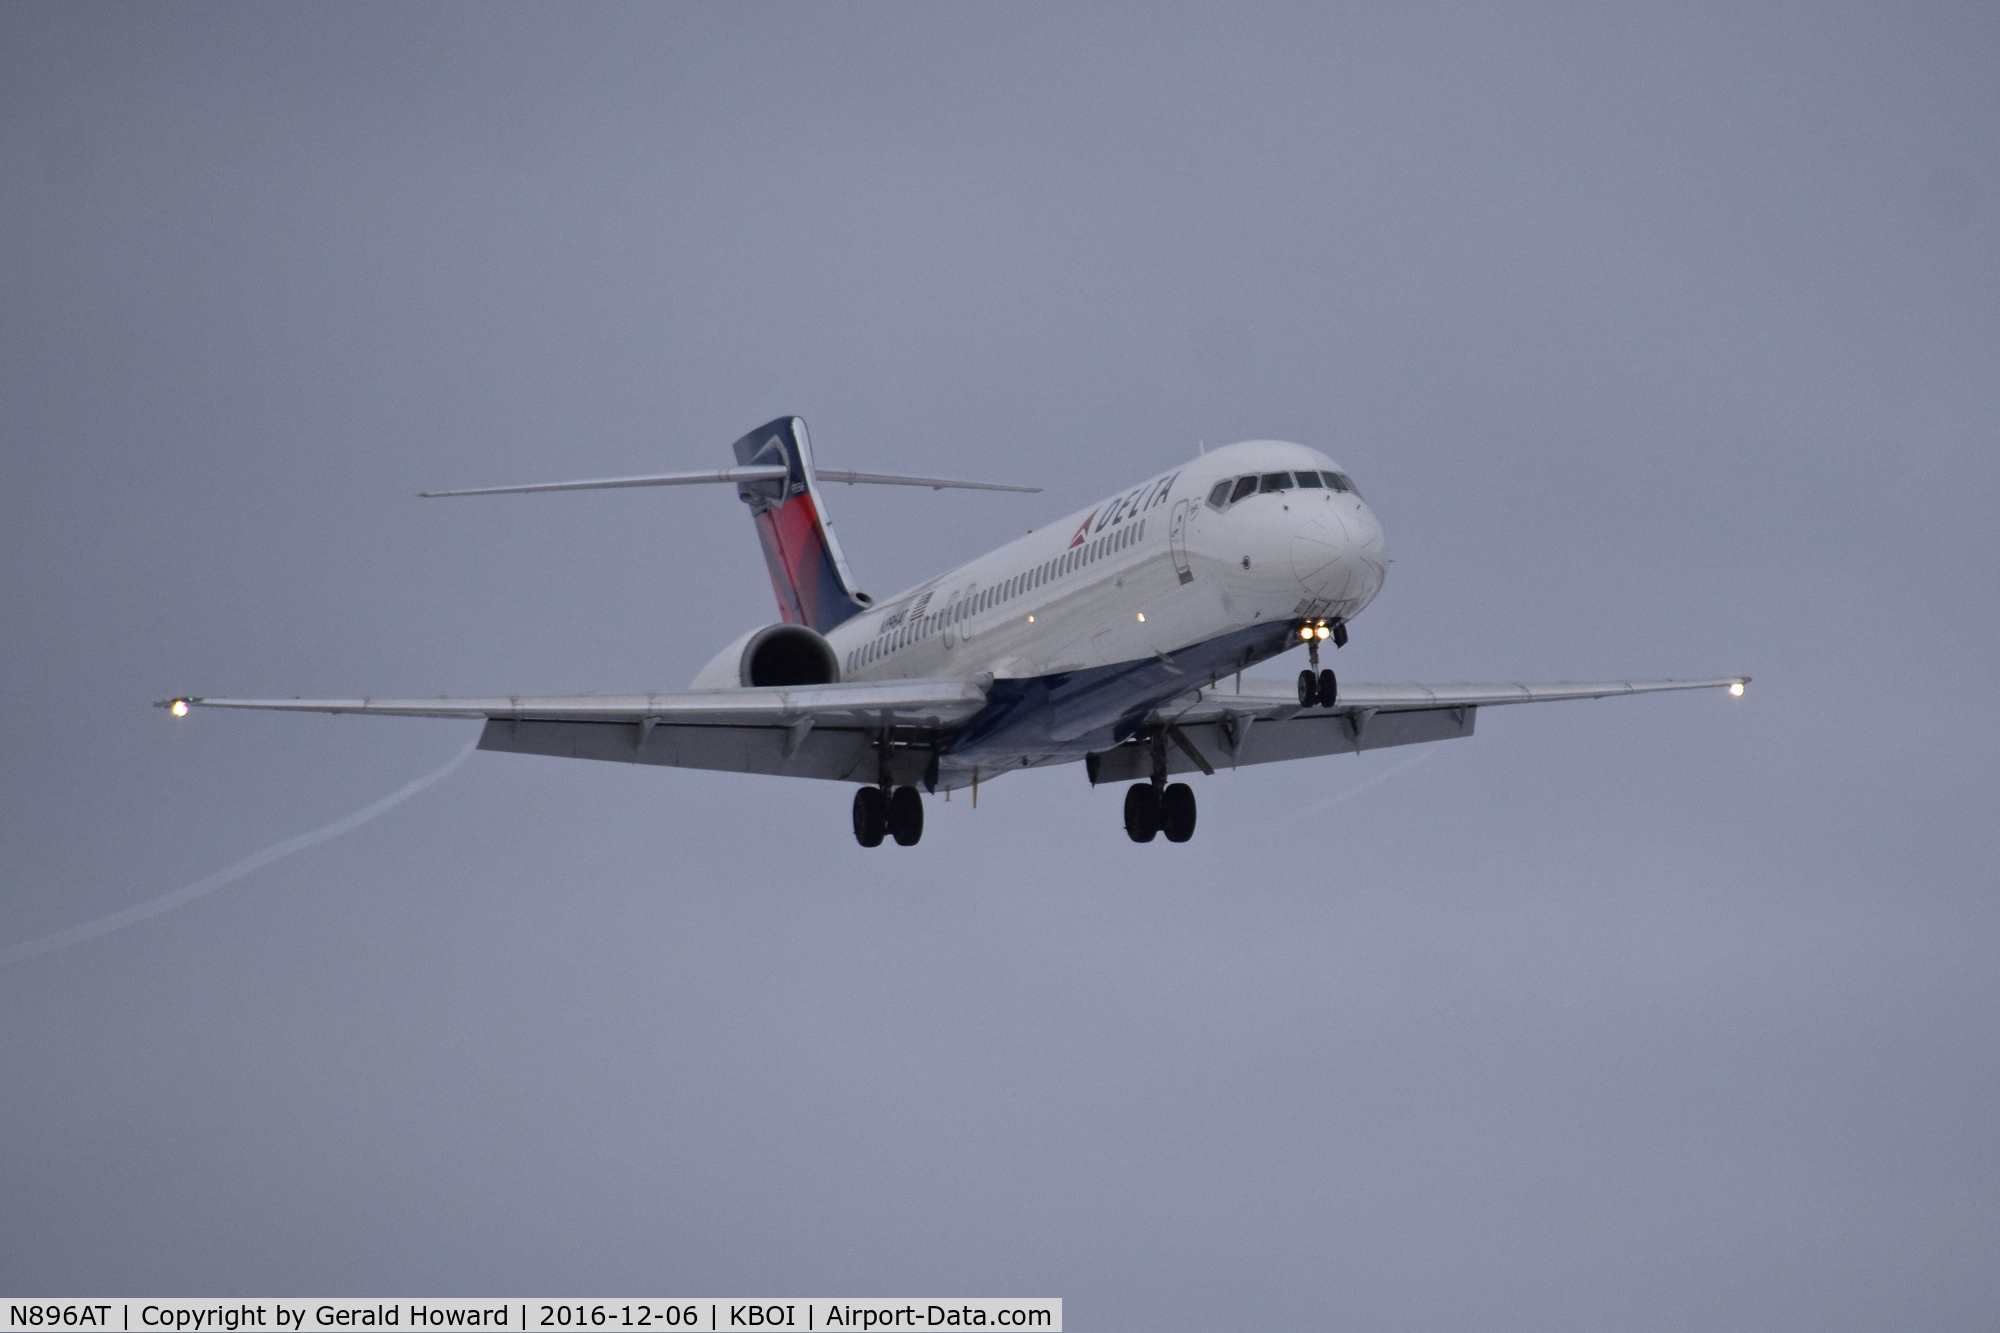 N896AT, 2005 Boeing 717-200 C/N 55048, On approach to RWY 10L.